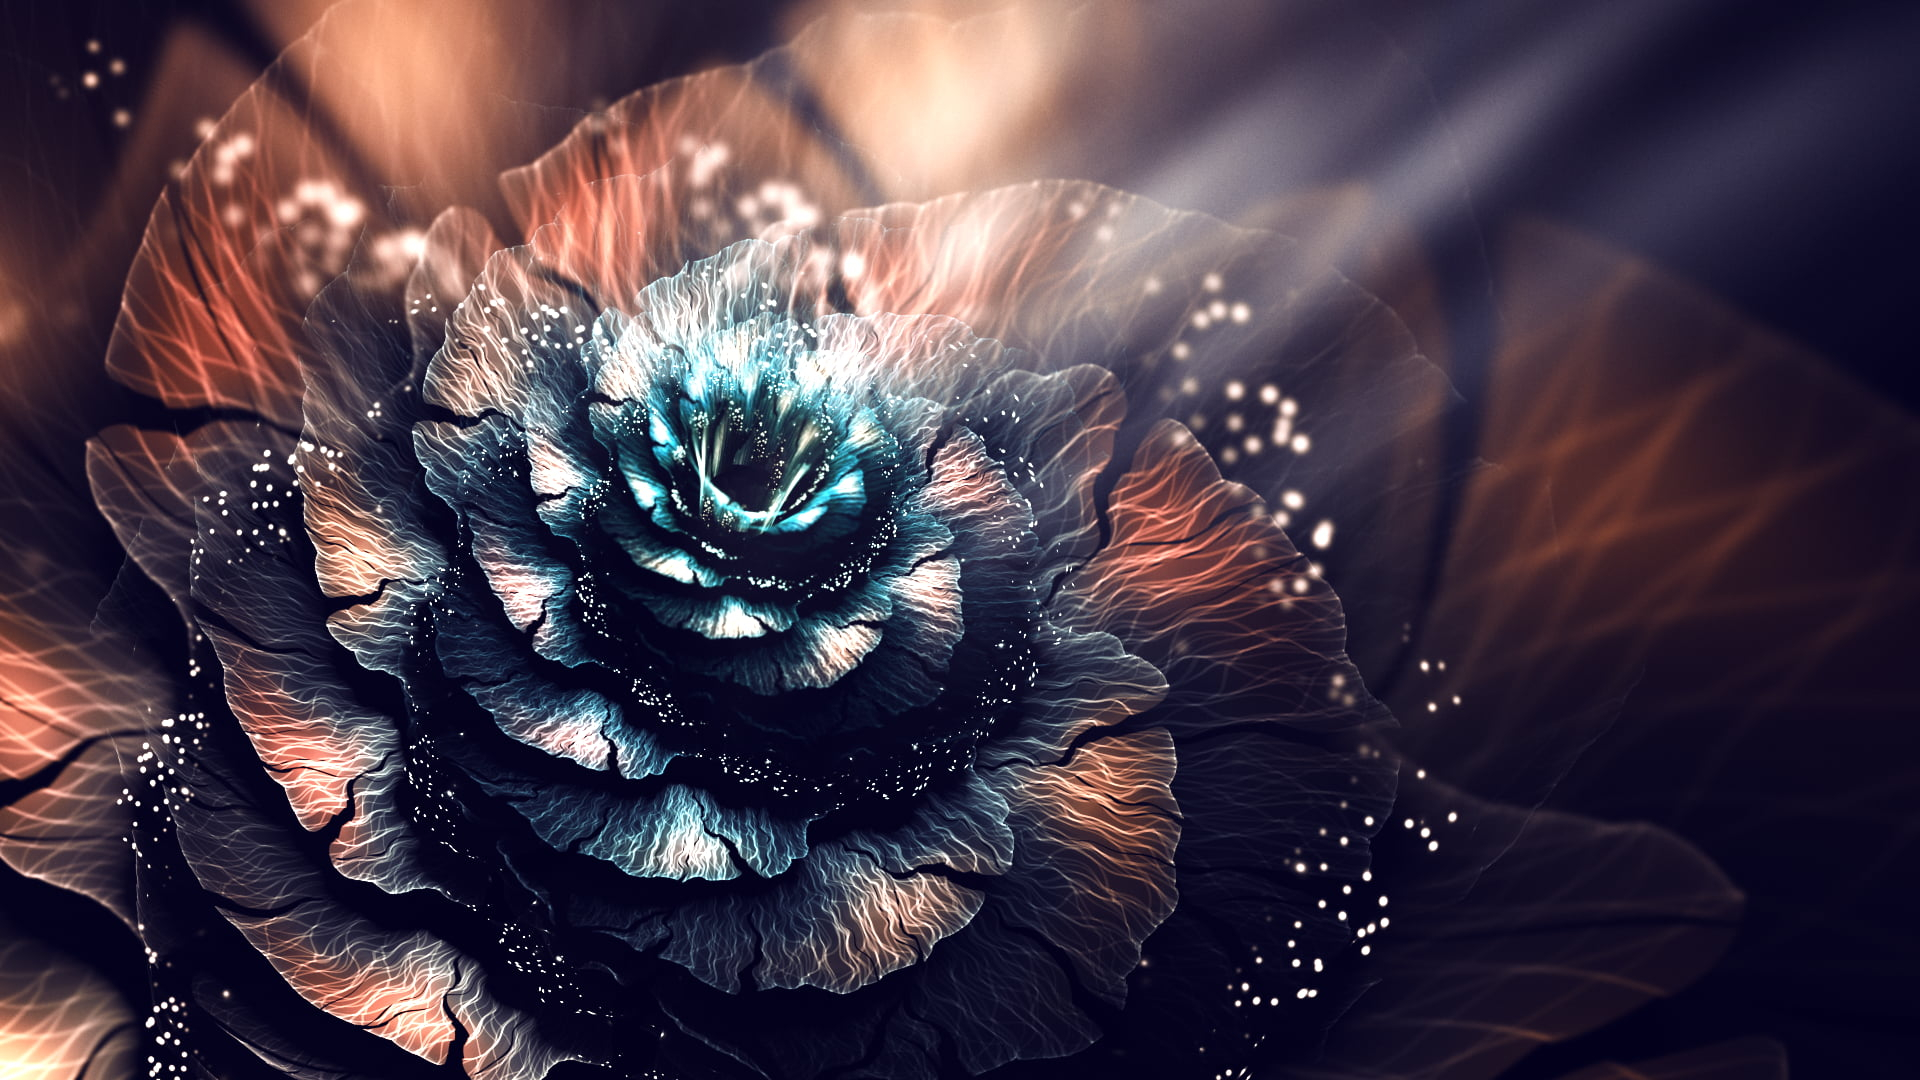 Blue and brown flower 3D wallpaper, abstract, fractal, fractal flowers wallpaper